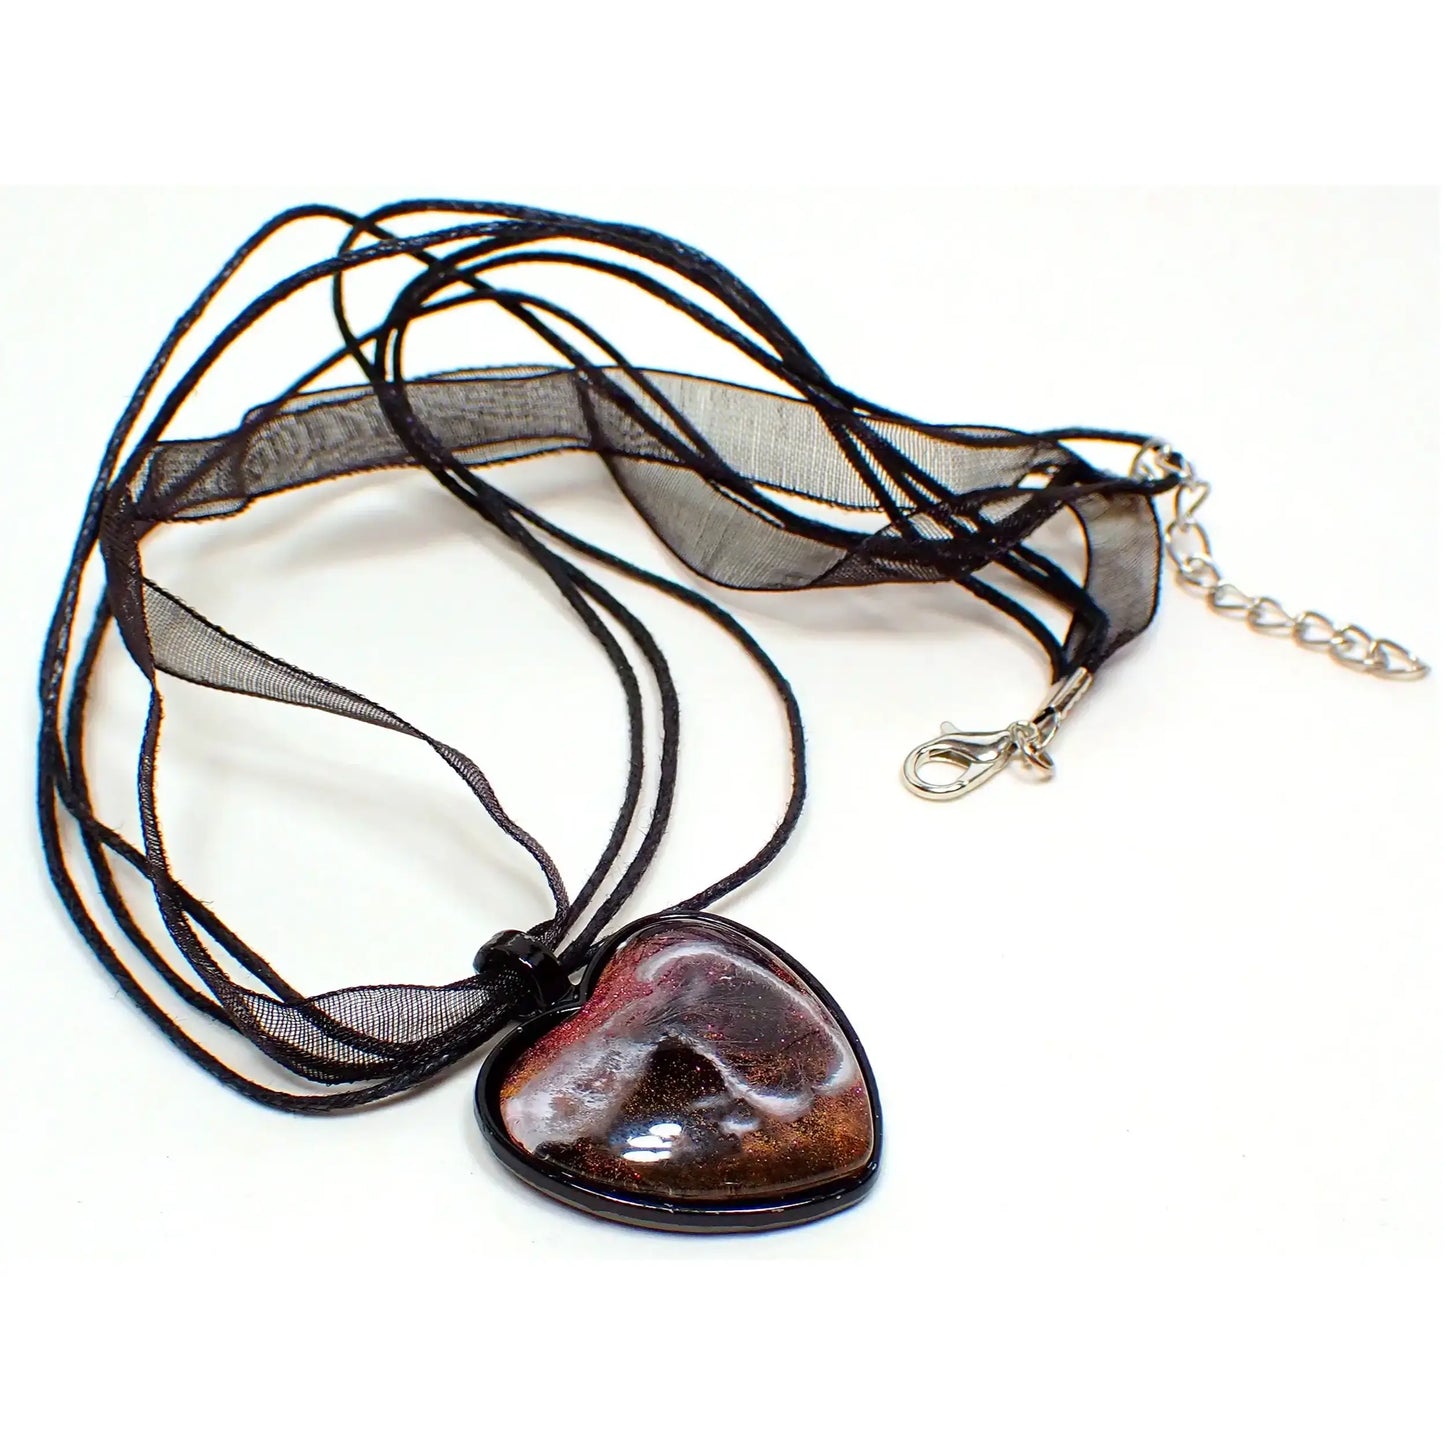 Top view of the handmade resin heart pendant. The necklace part is black and has three strands of faux leather cord with a strand of organza ribbon. There is a lobster clasp and extender chain at the ends. The pendant is a black coated heart shaped setting with a domed resin cab. The resin has shades of iridescent pink with hints of orange depending on the lighting. There is a white abstract frost like formation design through the resin.